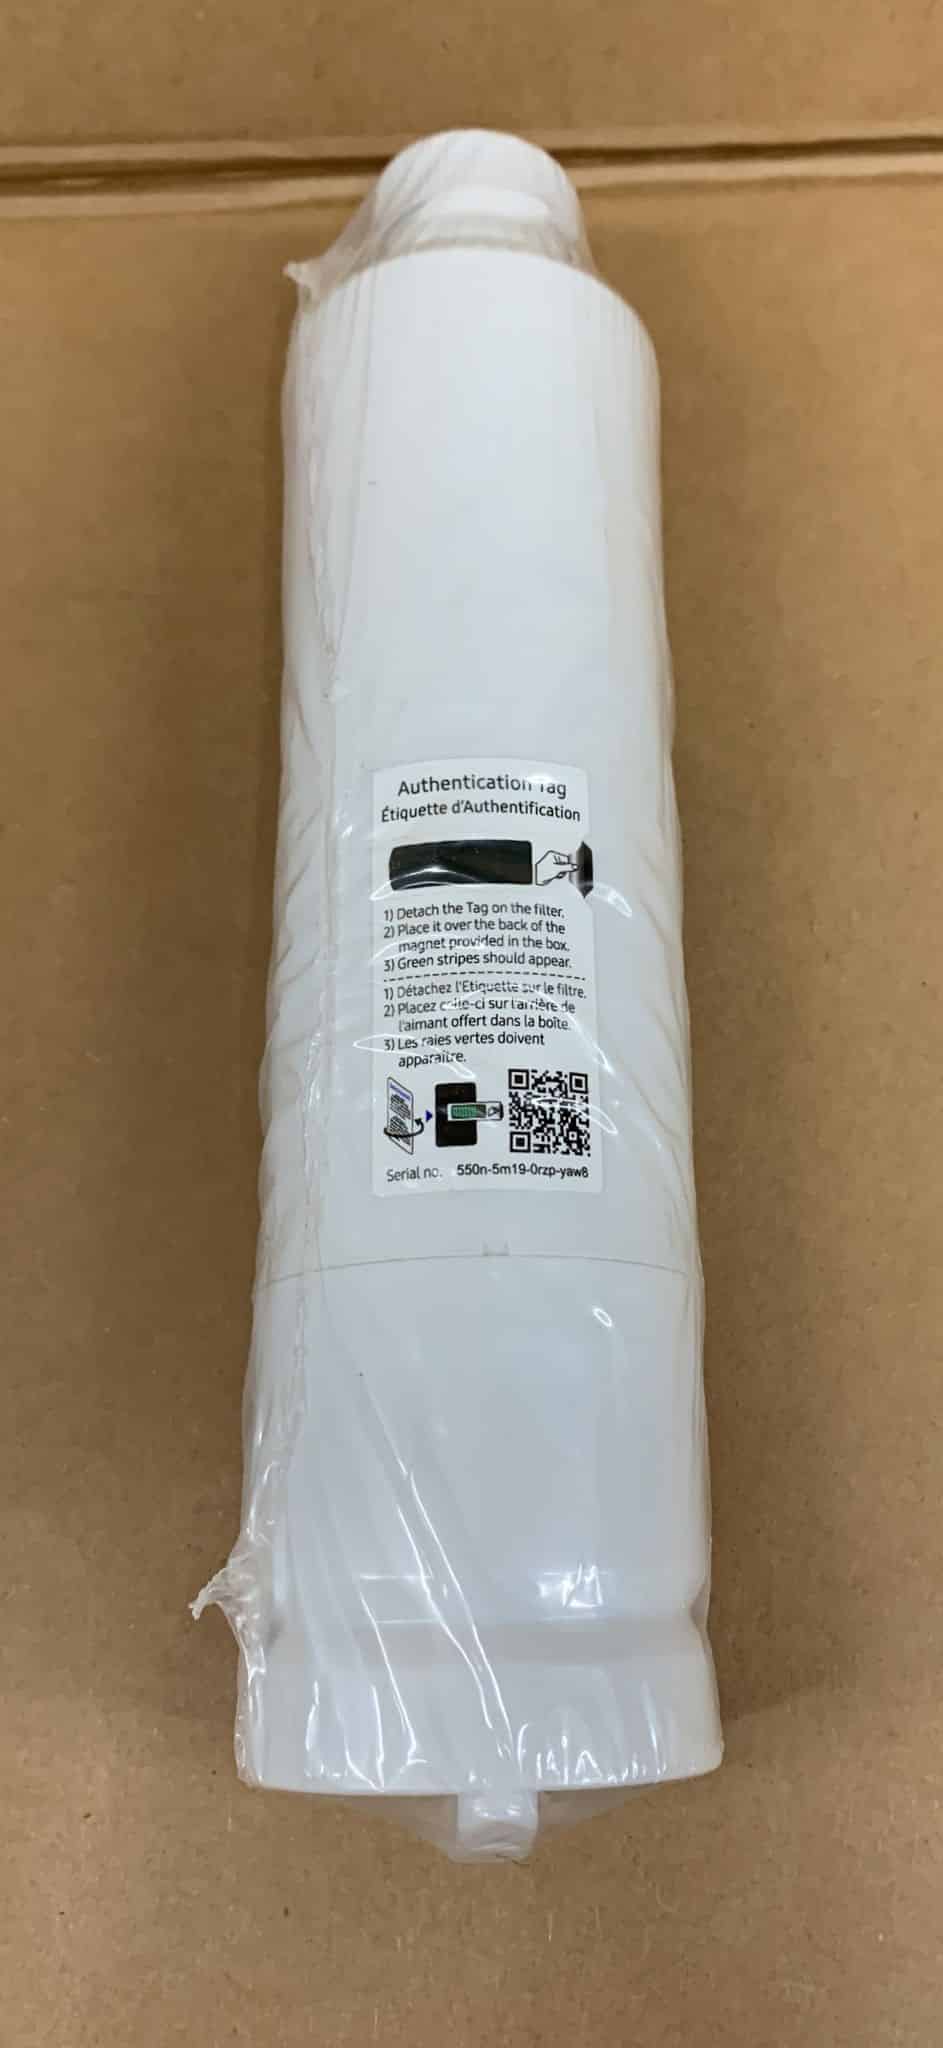 SAMSUNG Genuine Filter for Refrigerator Water and Ice 9768